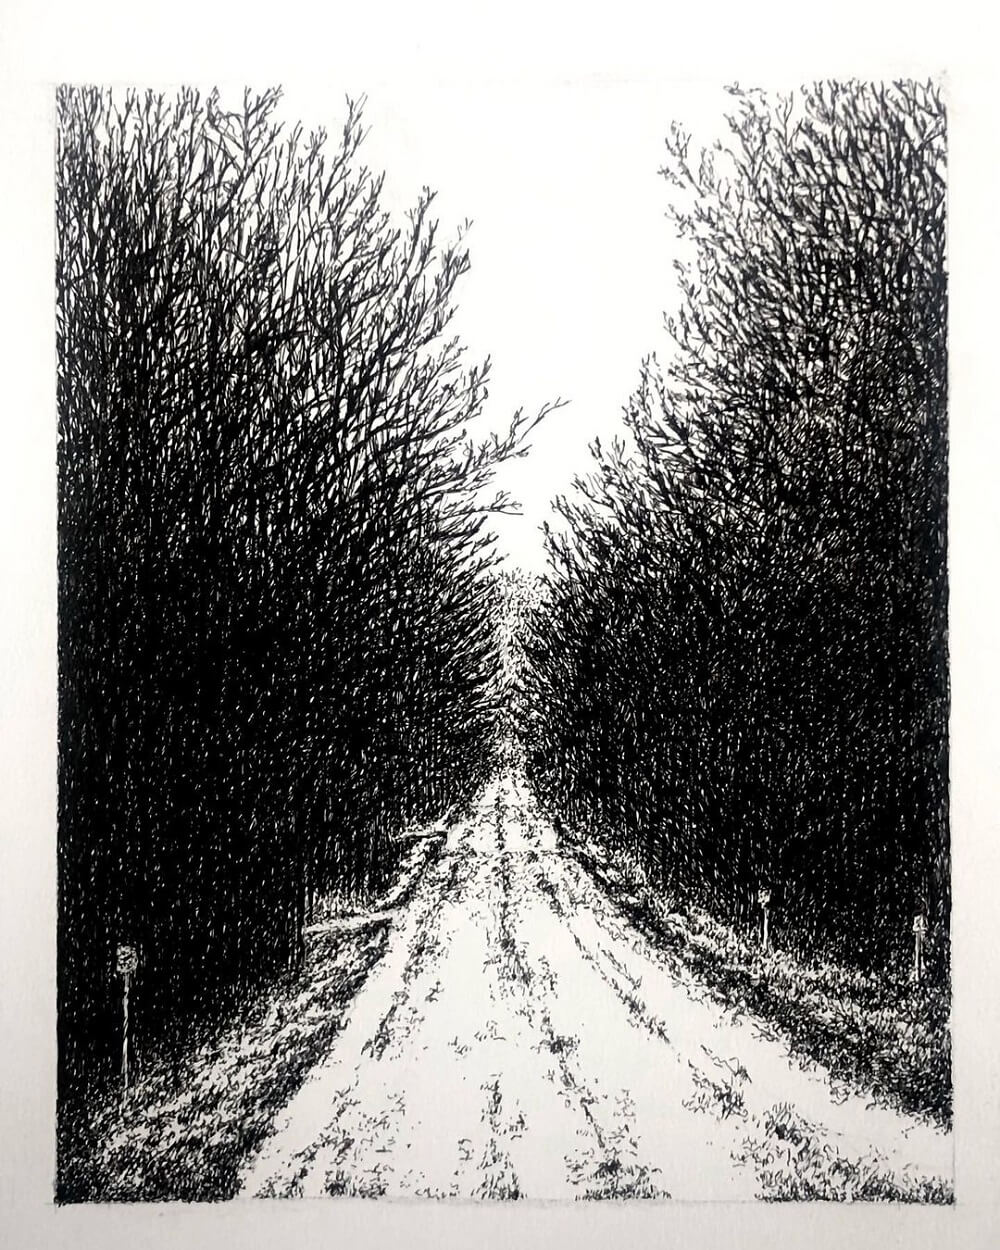 Dark and densely drawn pen sketch of a view along a dirt road.